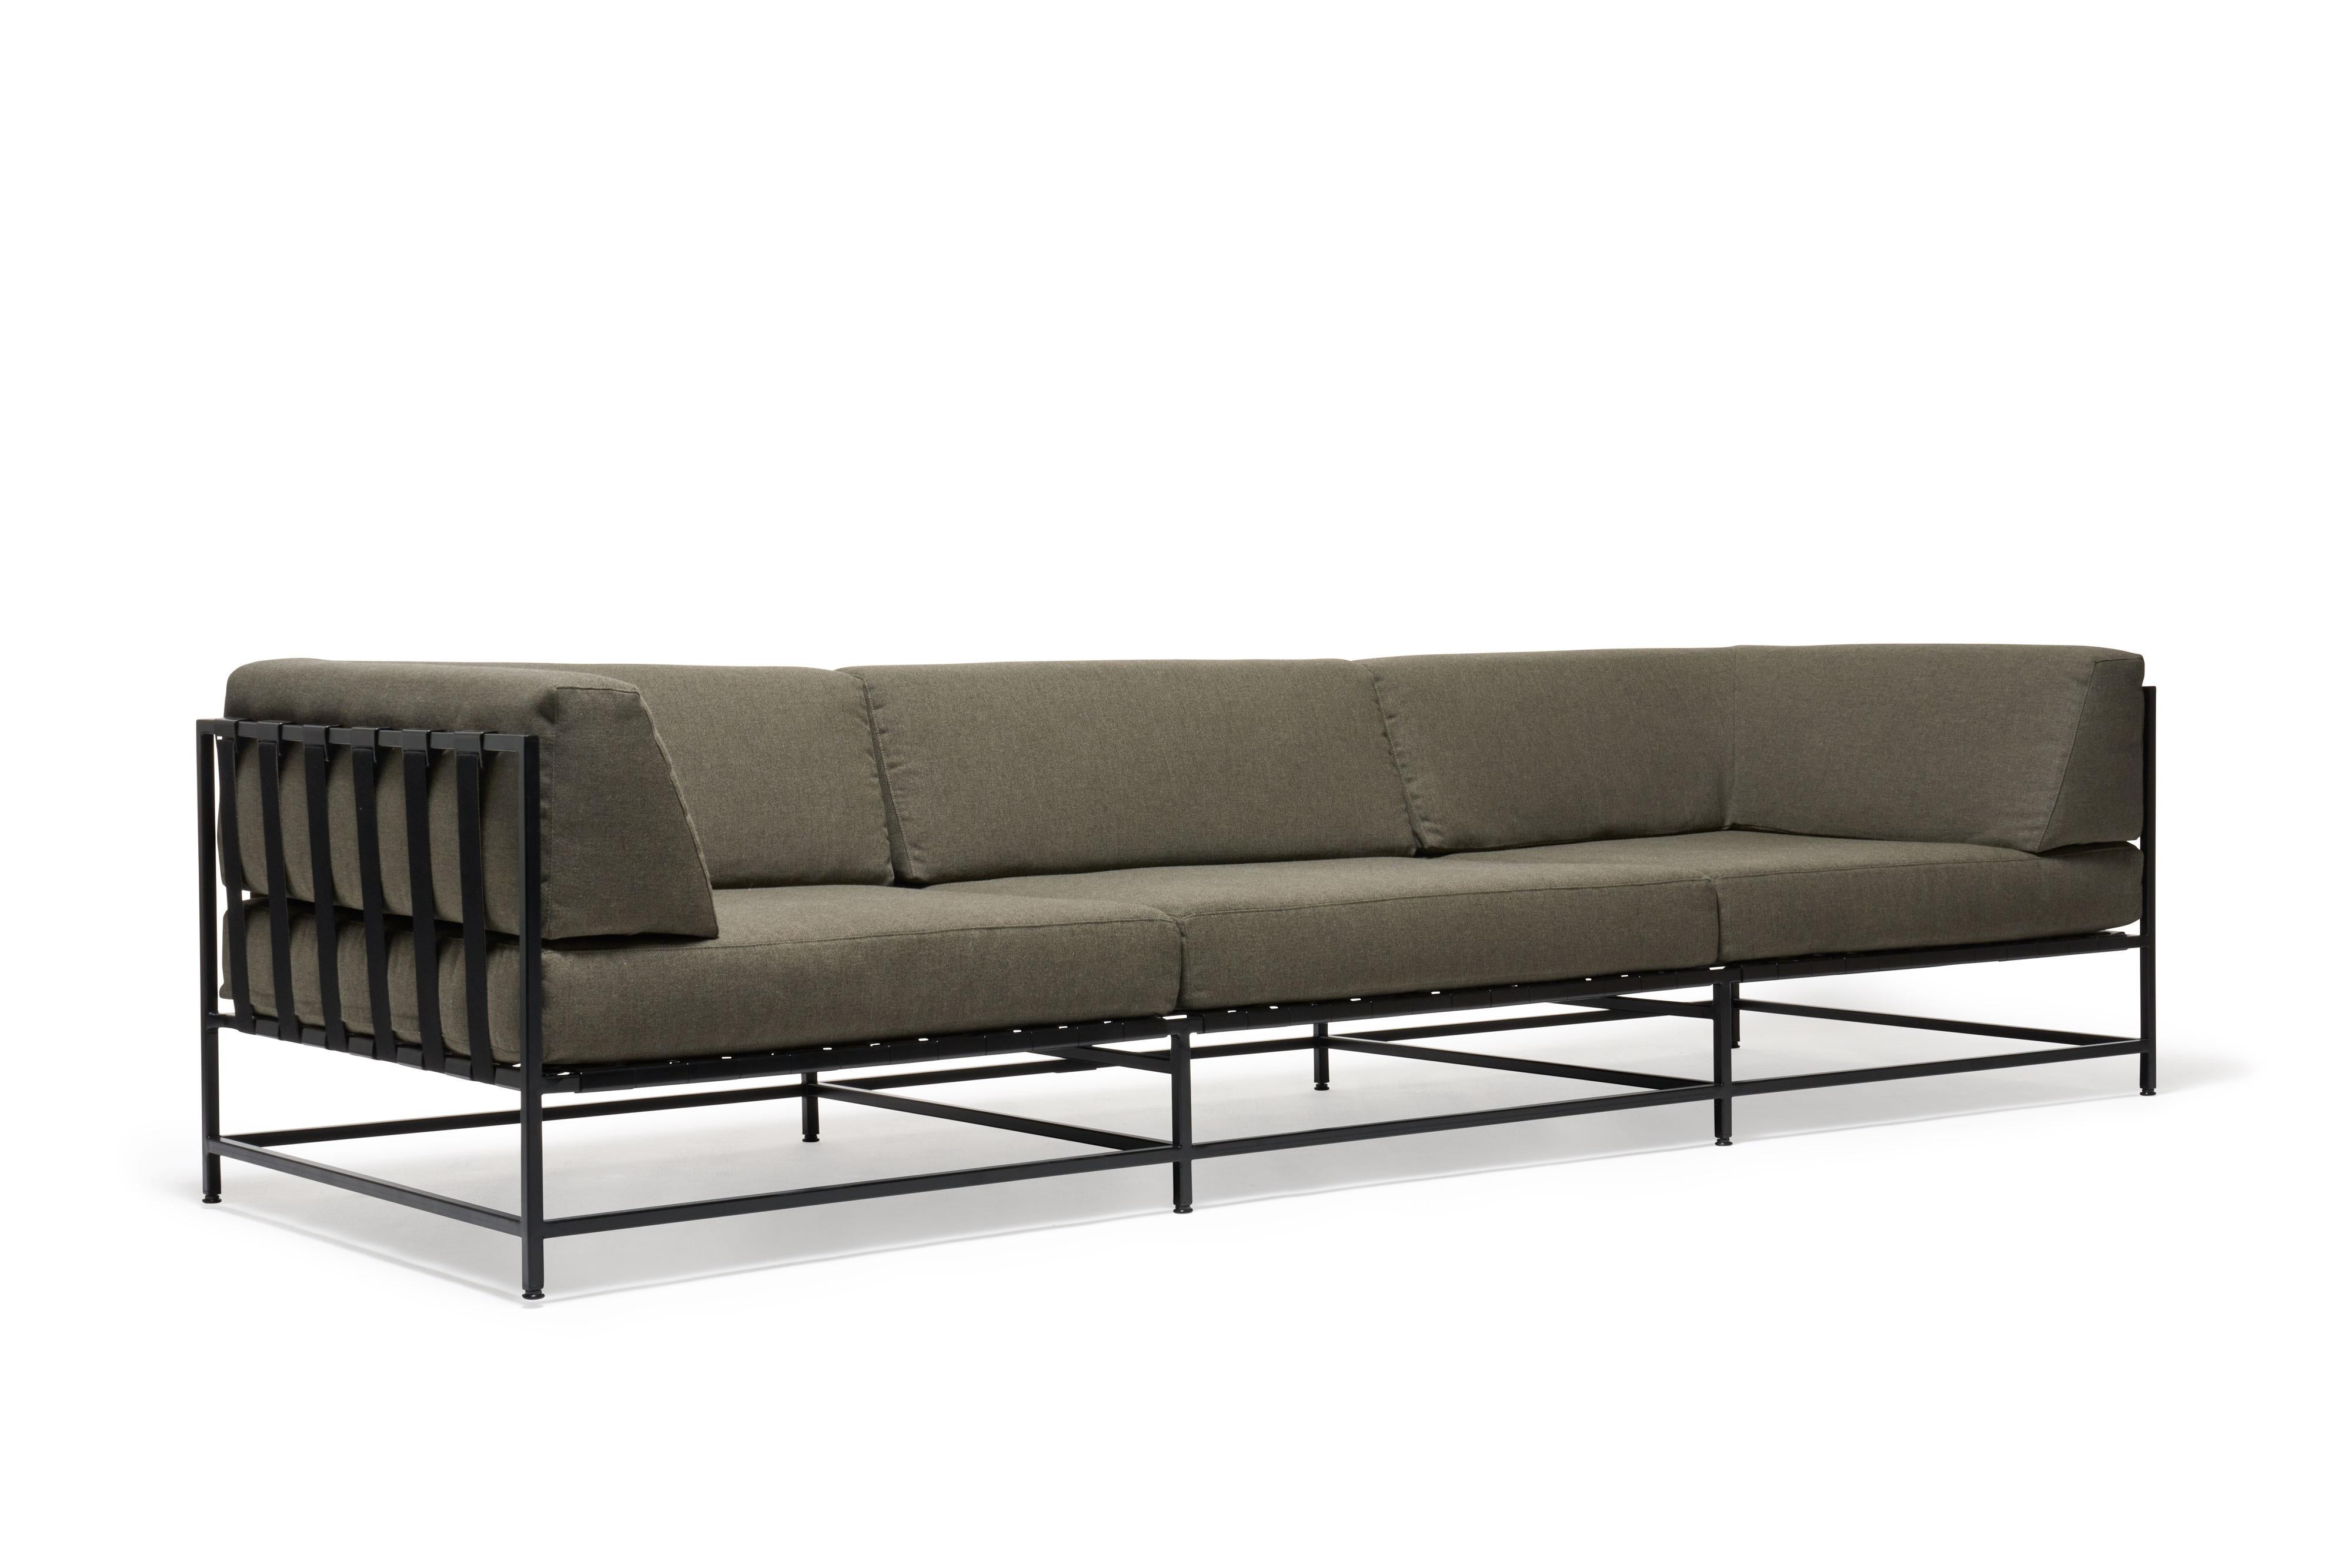 The Outdoor Collection sofa was designed to be as comfortable as it is modern and durable. It can be used on its own or paired with other elements of the Outdoor Collection to create a larger sectional. The stretch webbing base creates a soft